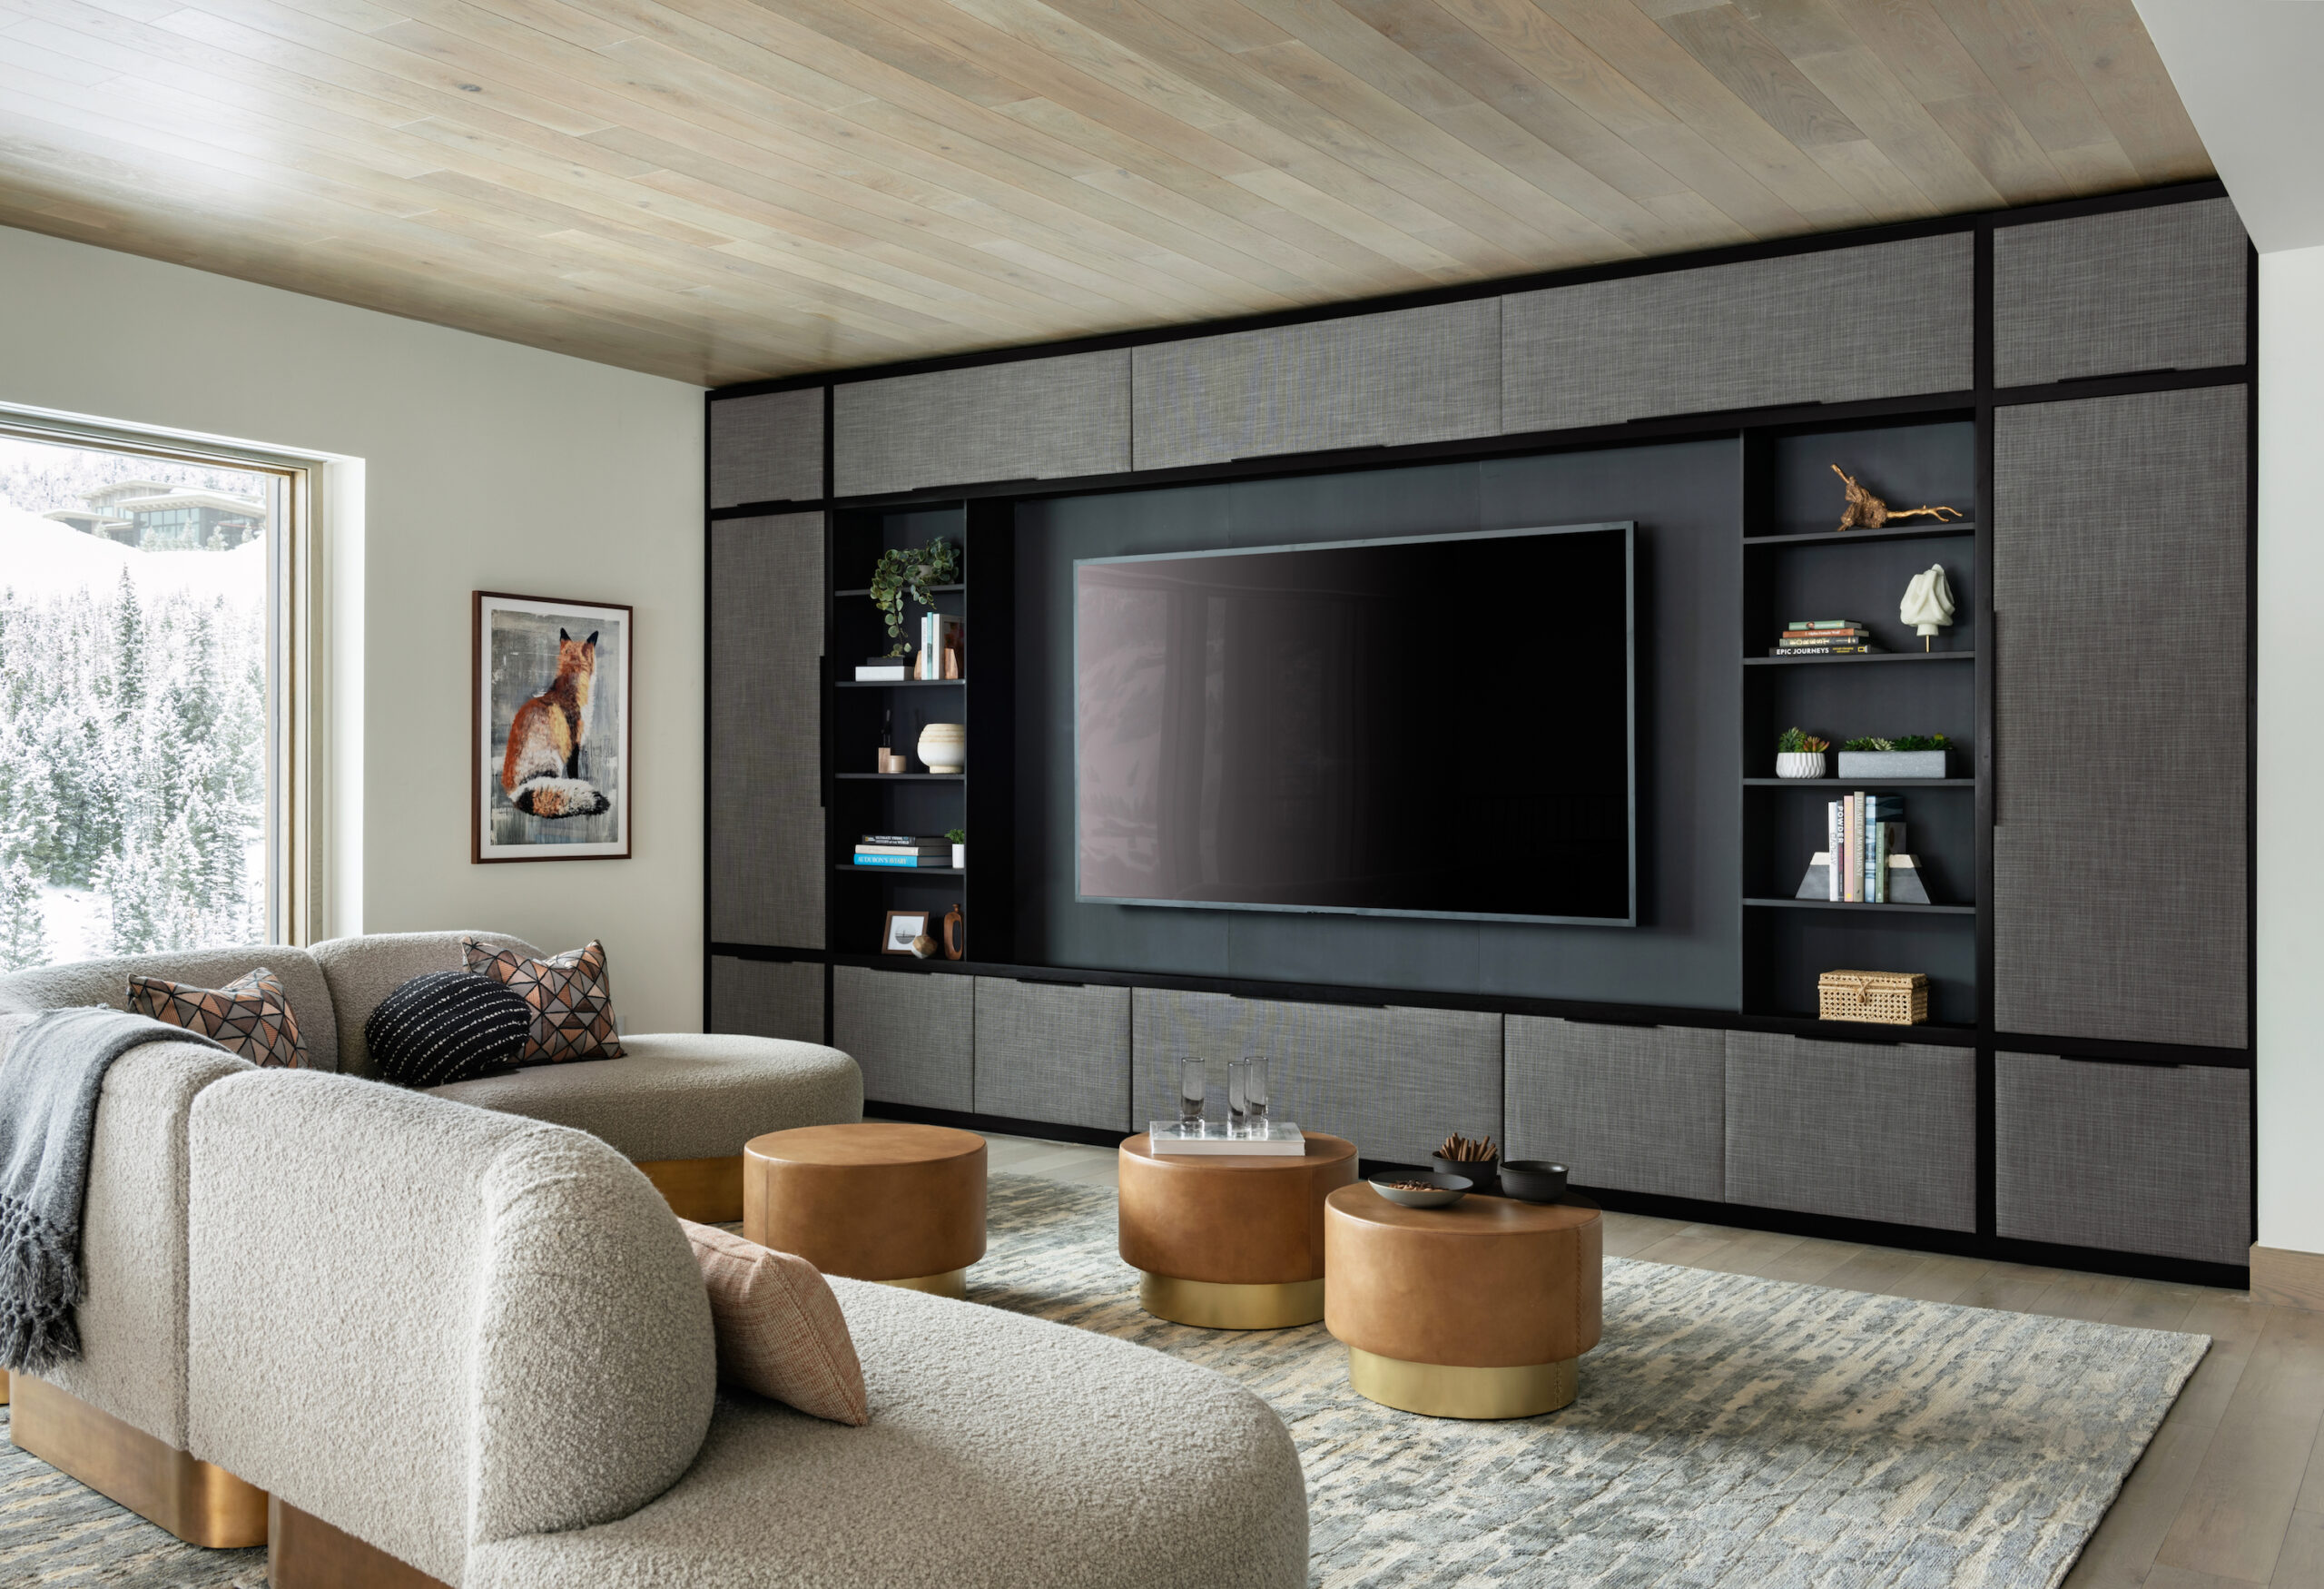 Media room with wood ceiling